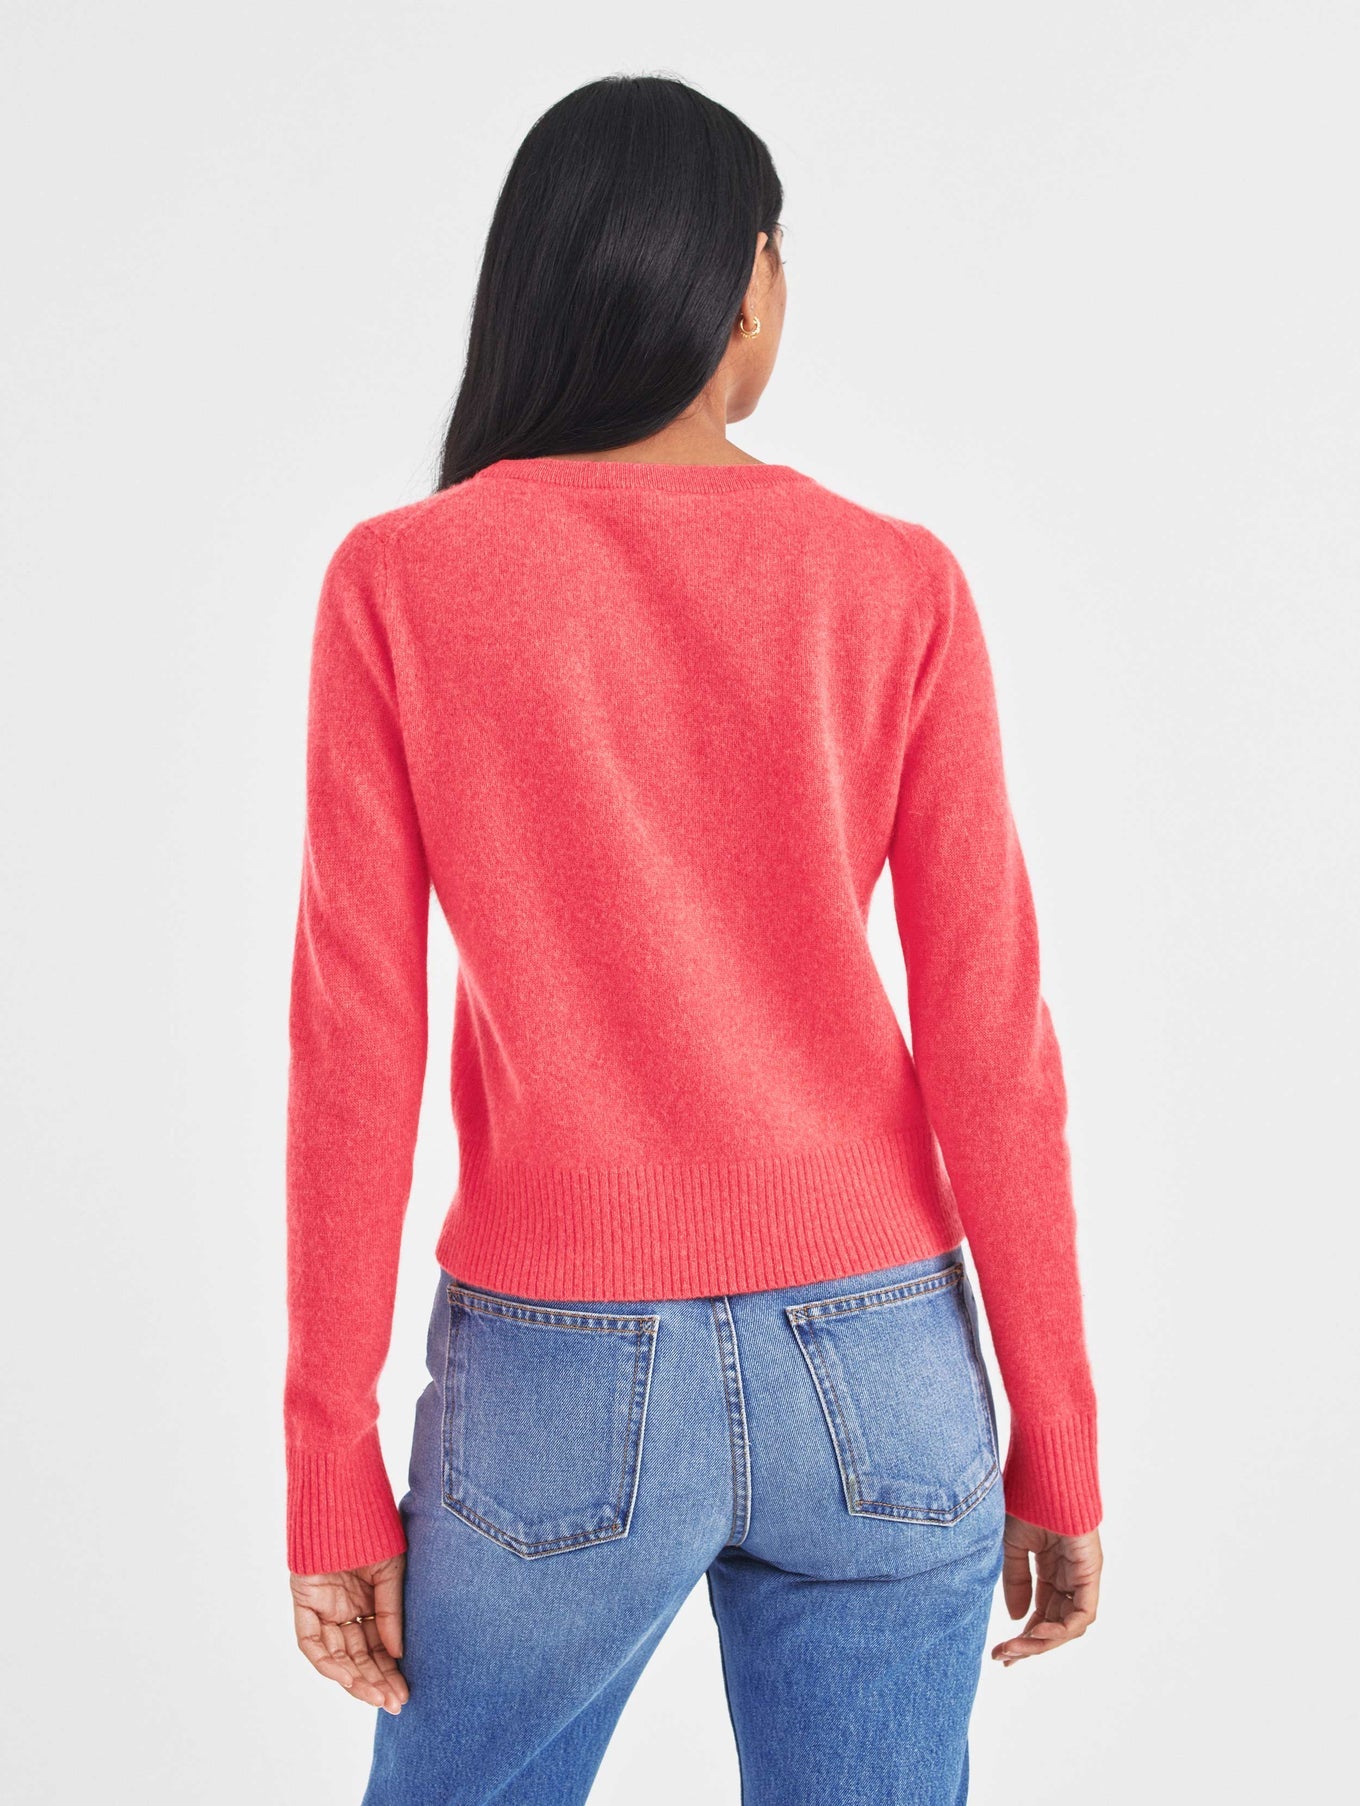 Classic crew - red ember heather